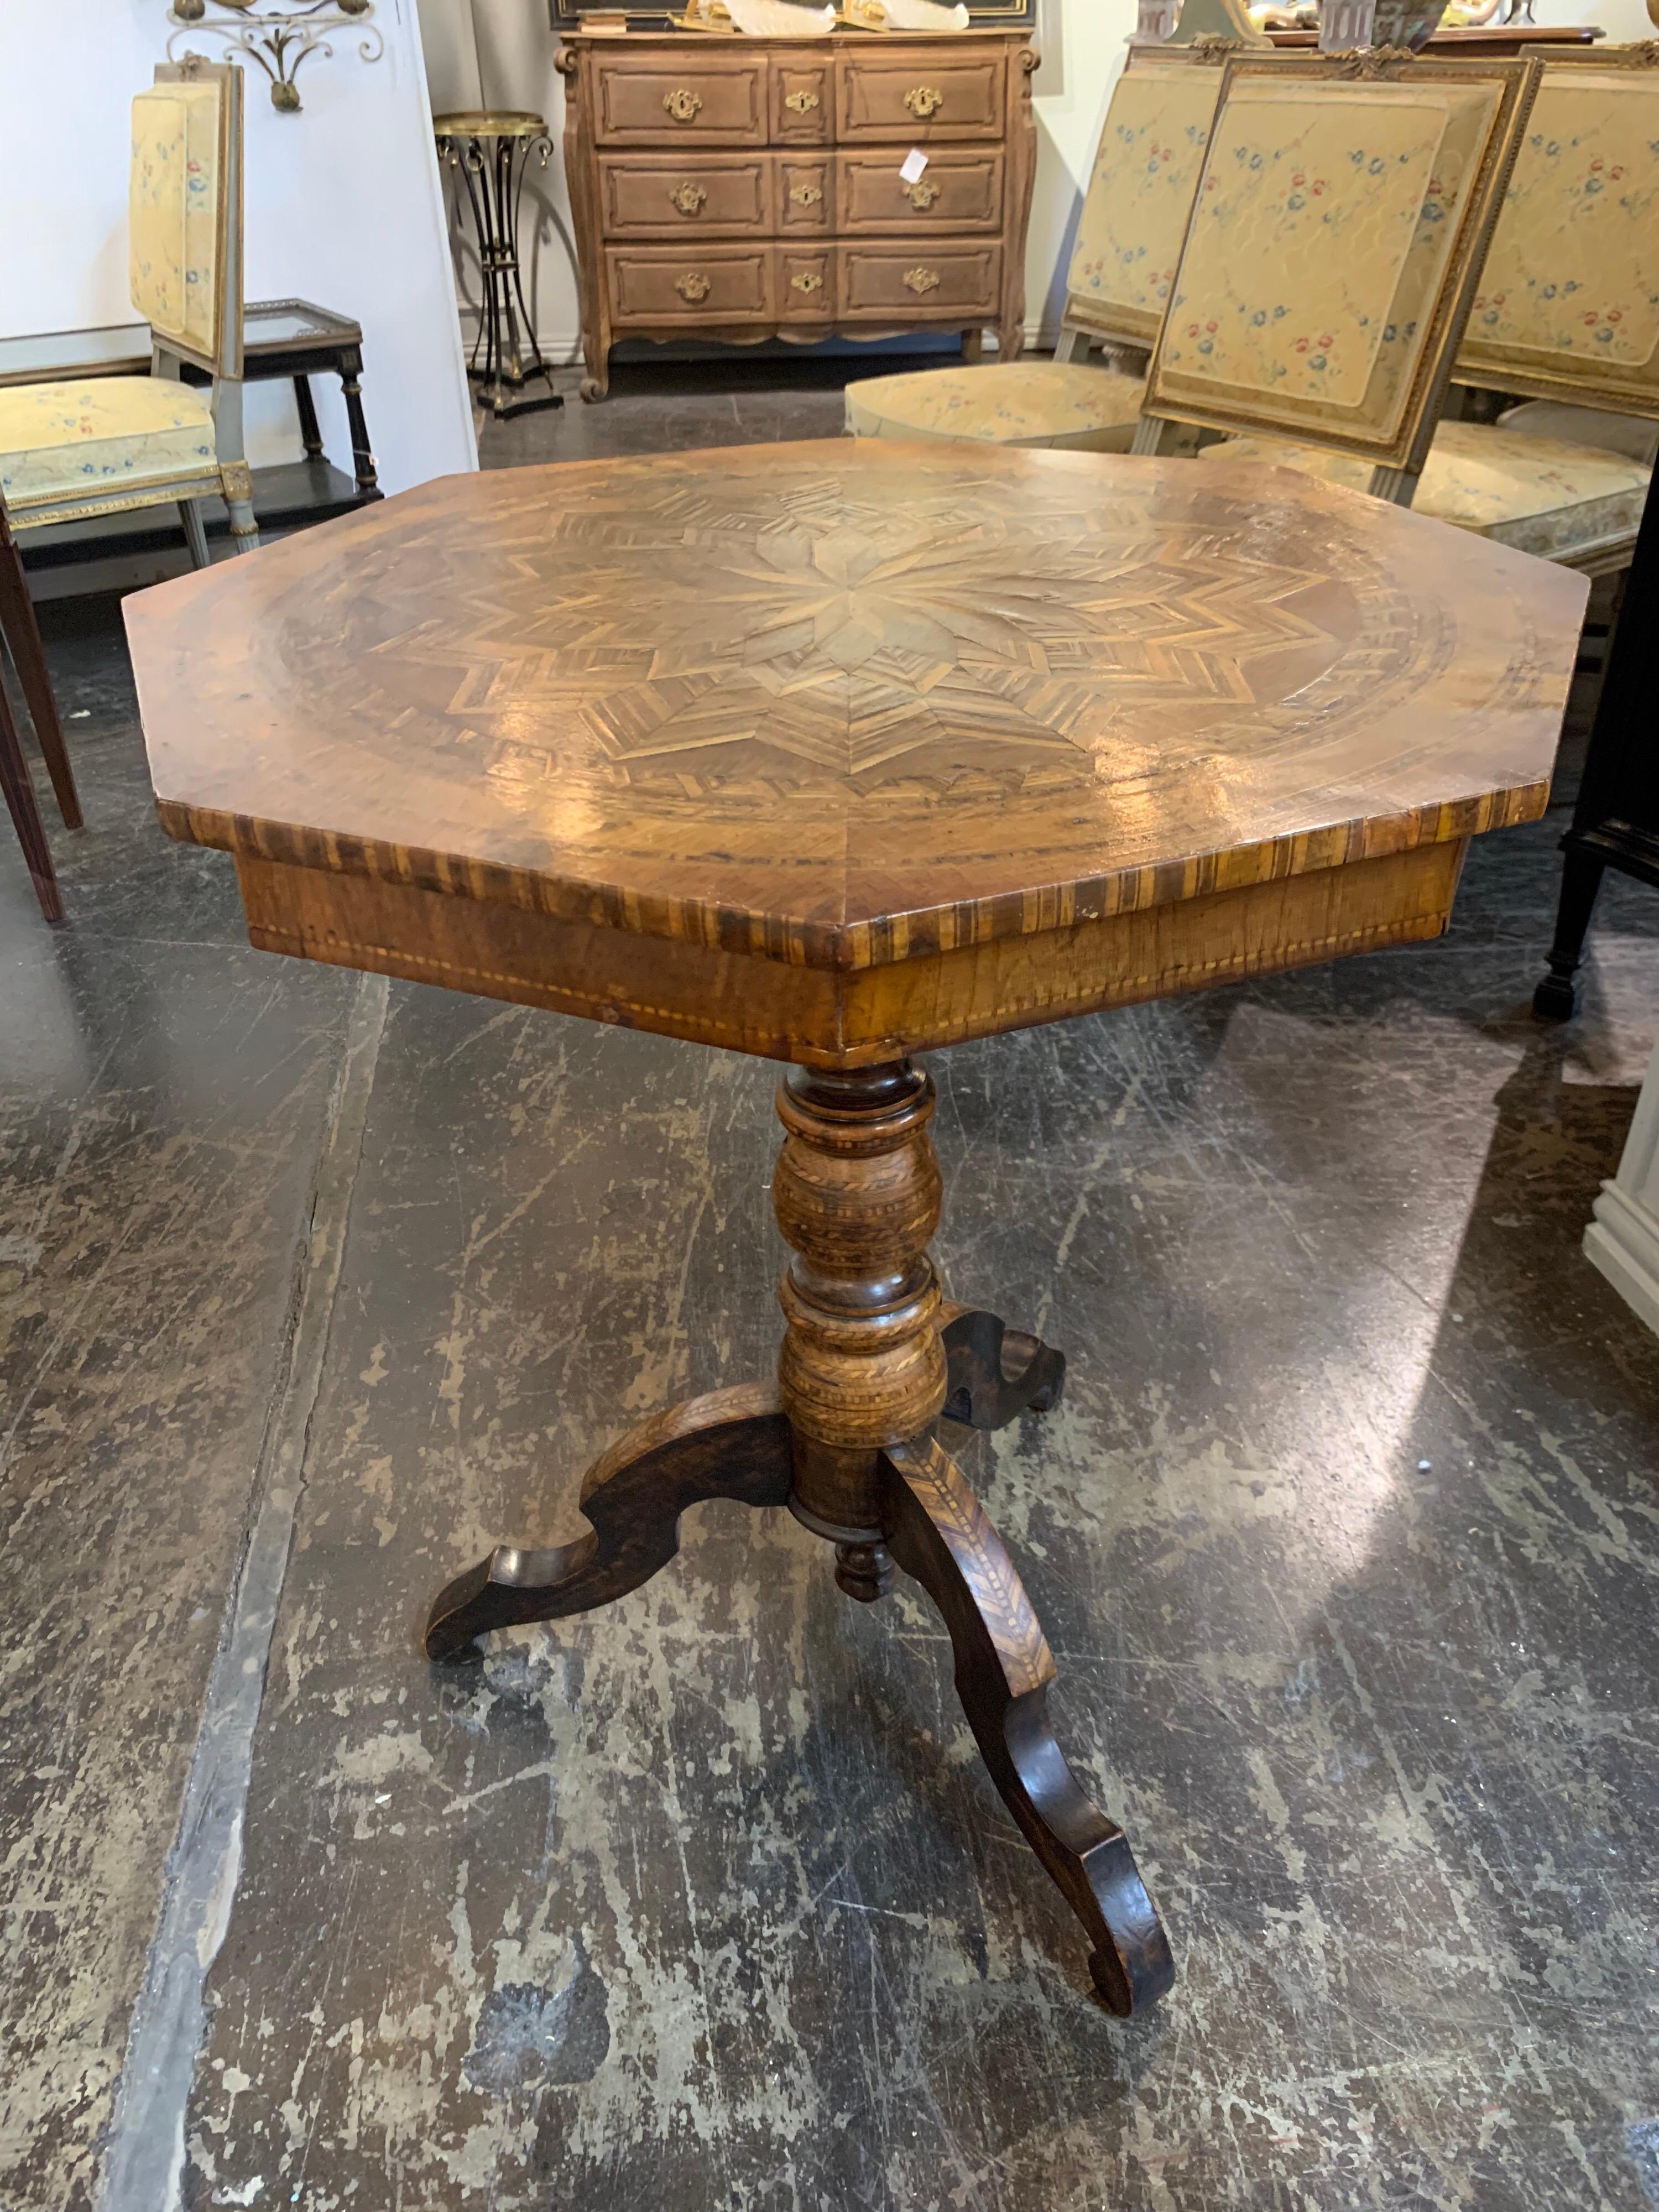 Gorgeous 19th century northern Italian walnut side table. The table has a beautiful inlaid wood in a star pattern. Extremely very fine craftsmanship!